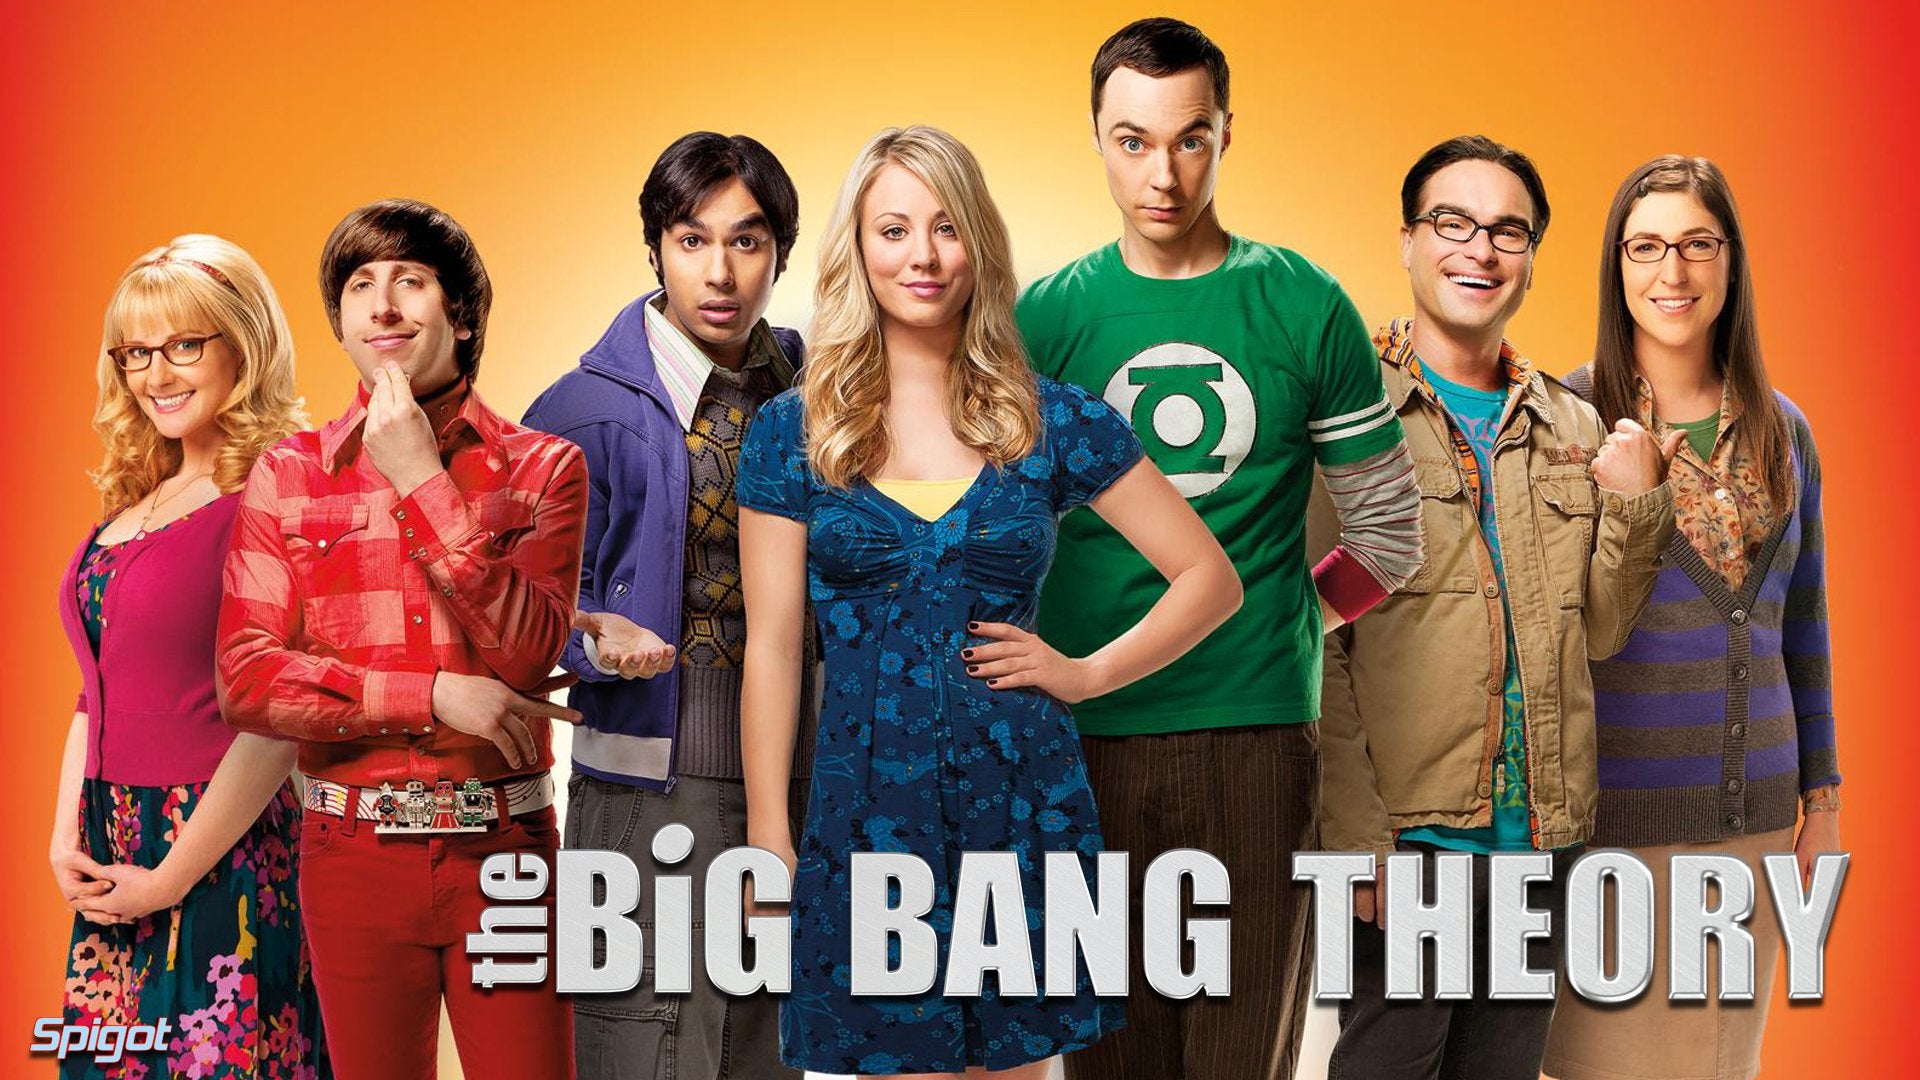 The Big Bang Theory: The Complete Series - Limited Edition - Seasons 1-12